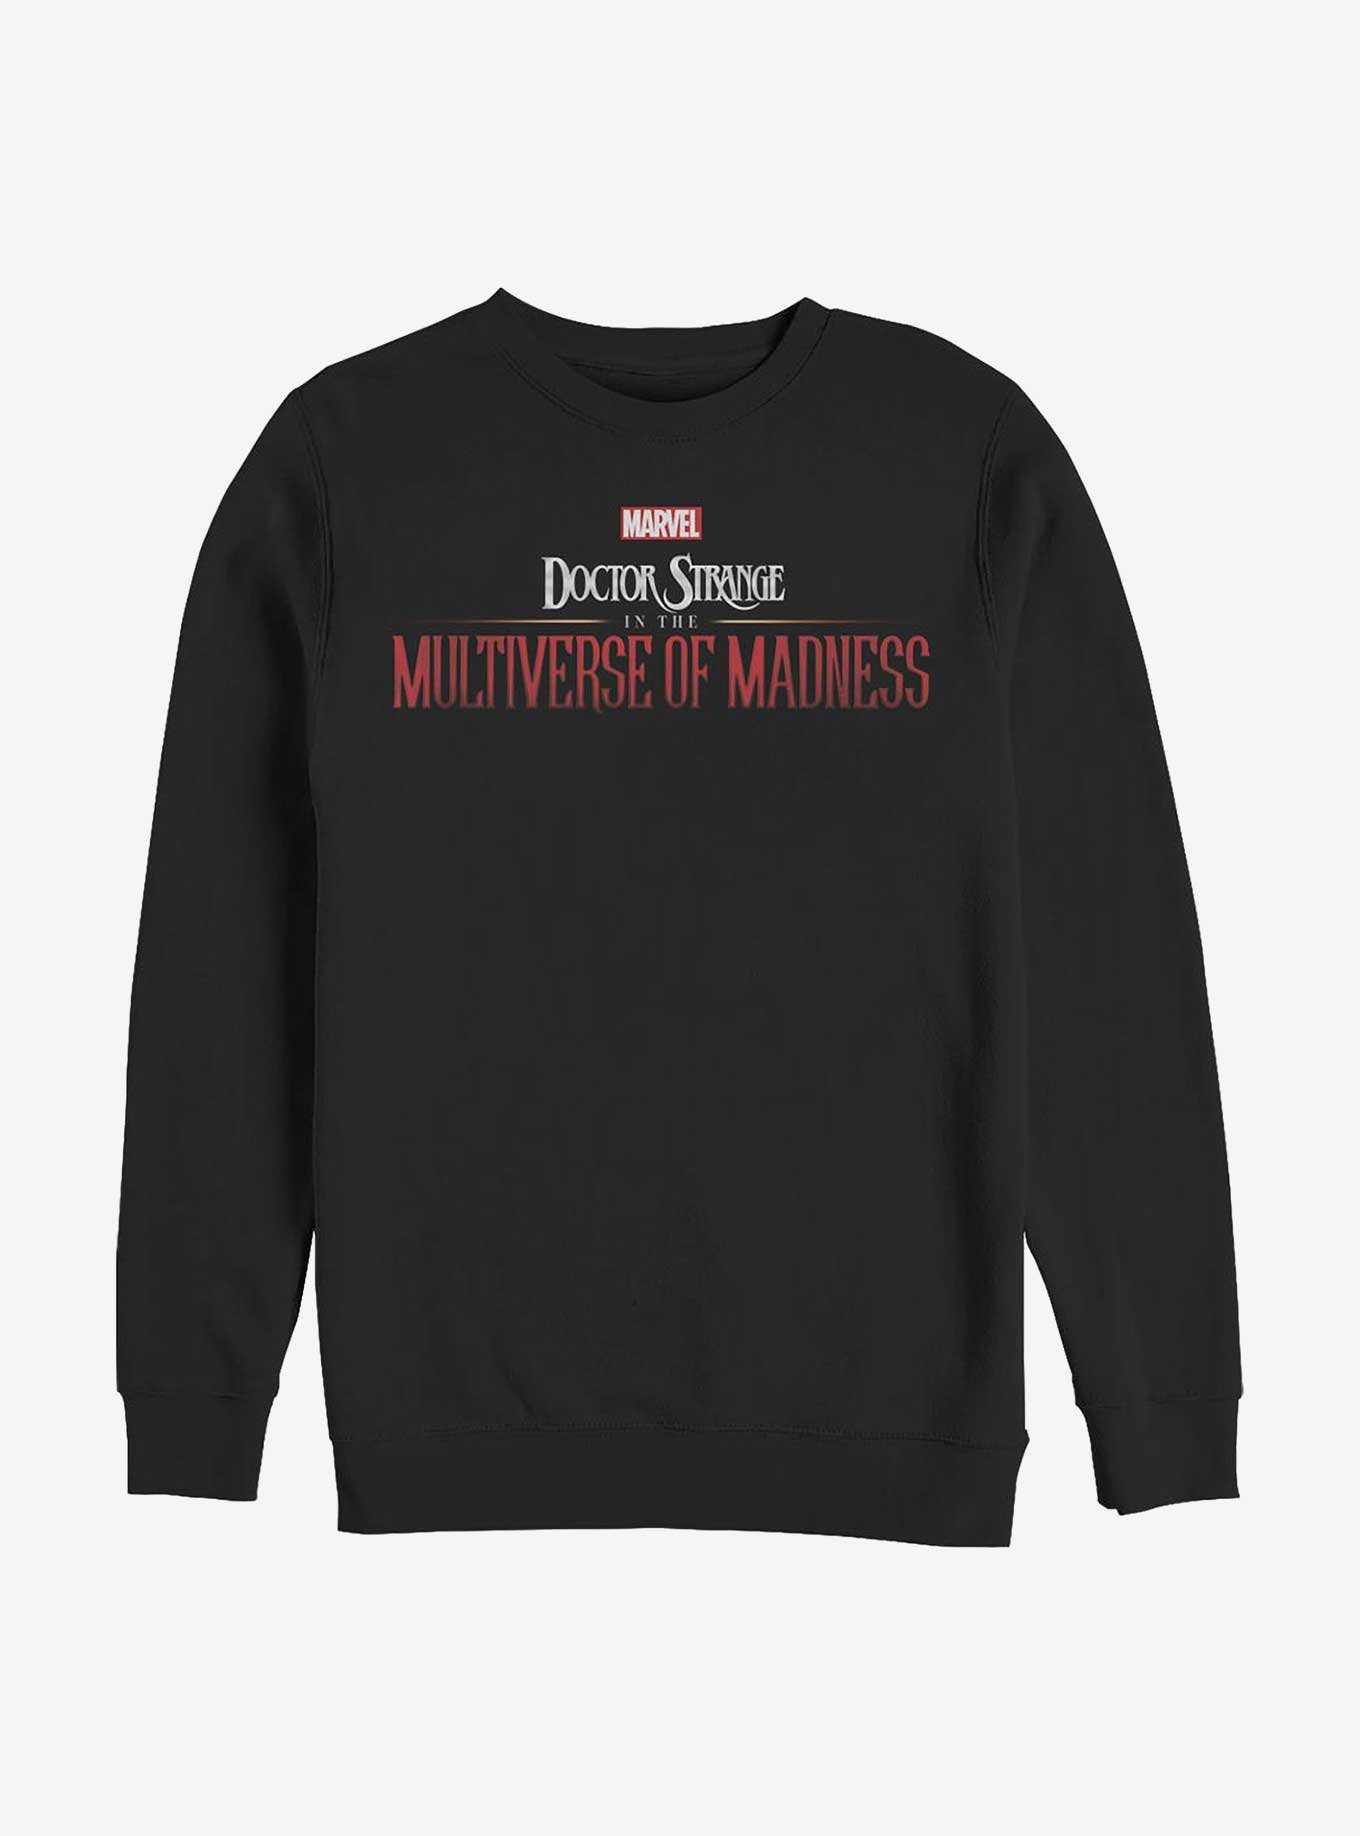 Marvel Doctor Strange In The Multiverse Of Madness TItle Crew Sweatshirt, , hi-res